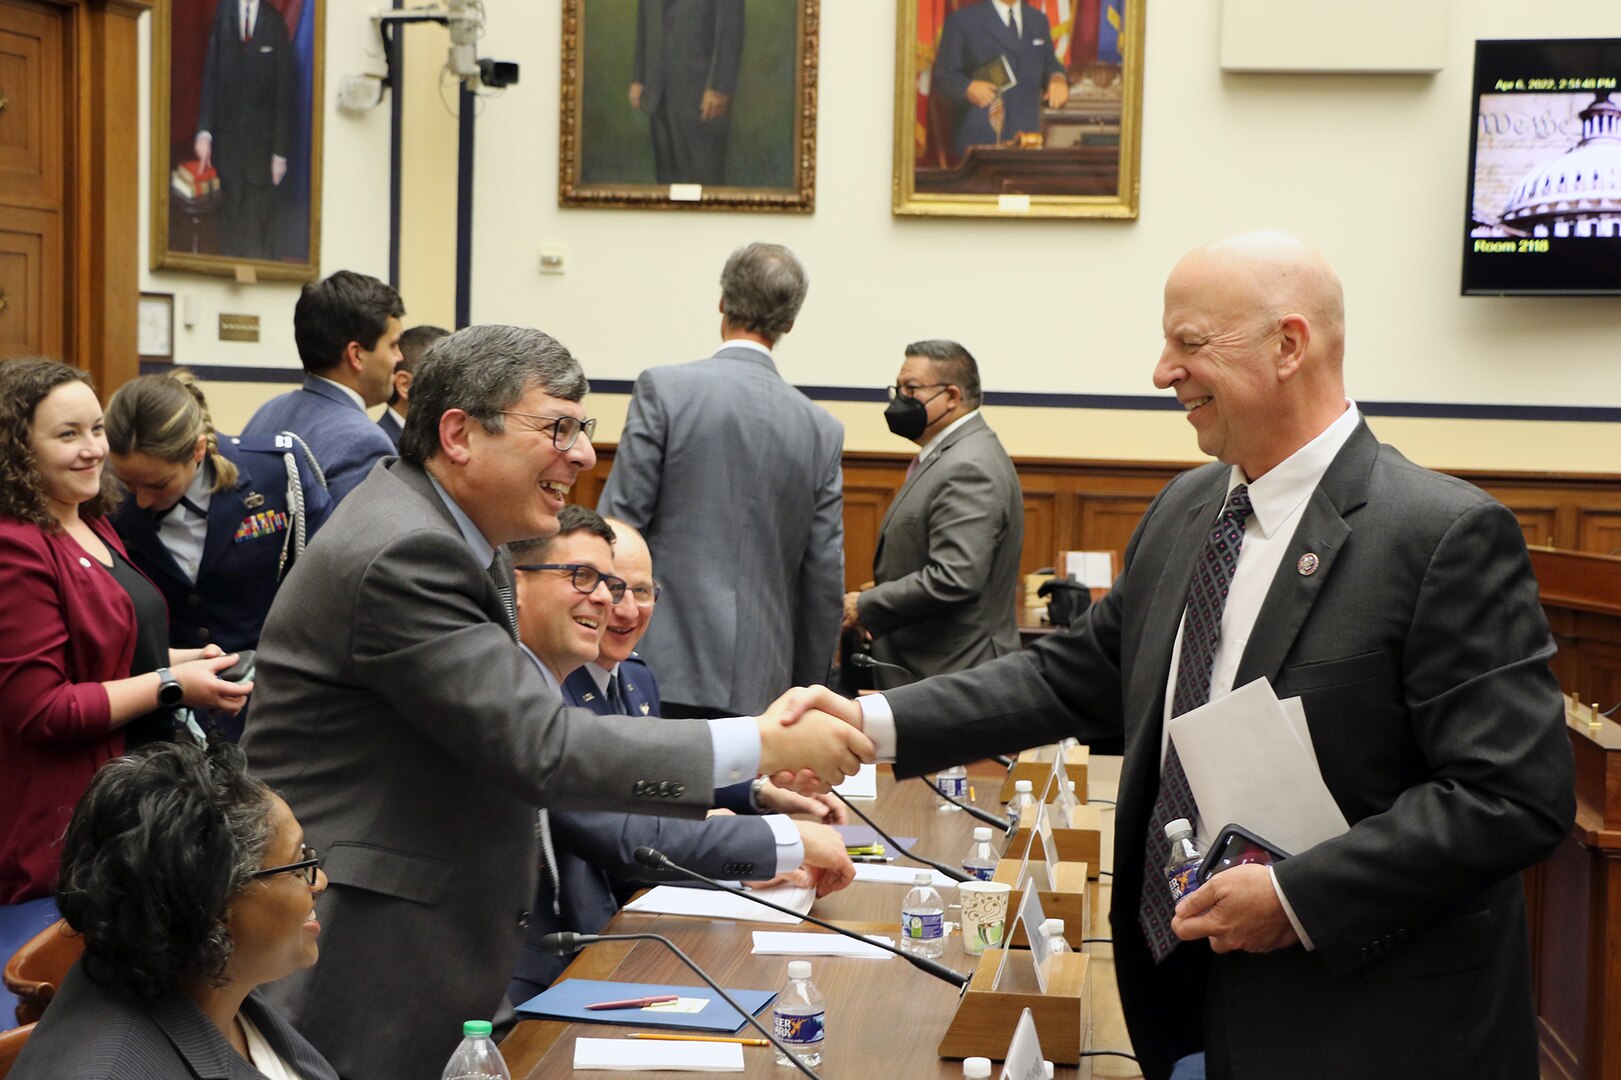 NRO Director Dr. Chris Scolese spoke with the House Armed Services Committee Subcommittee on Strategic Forces hearing on April 6